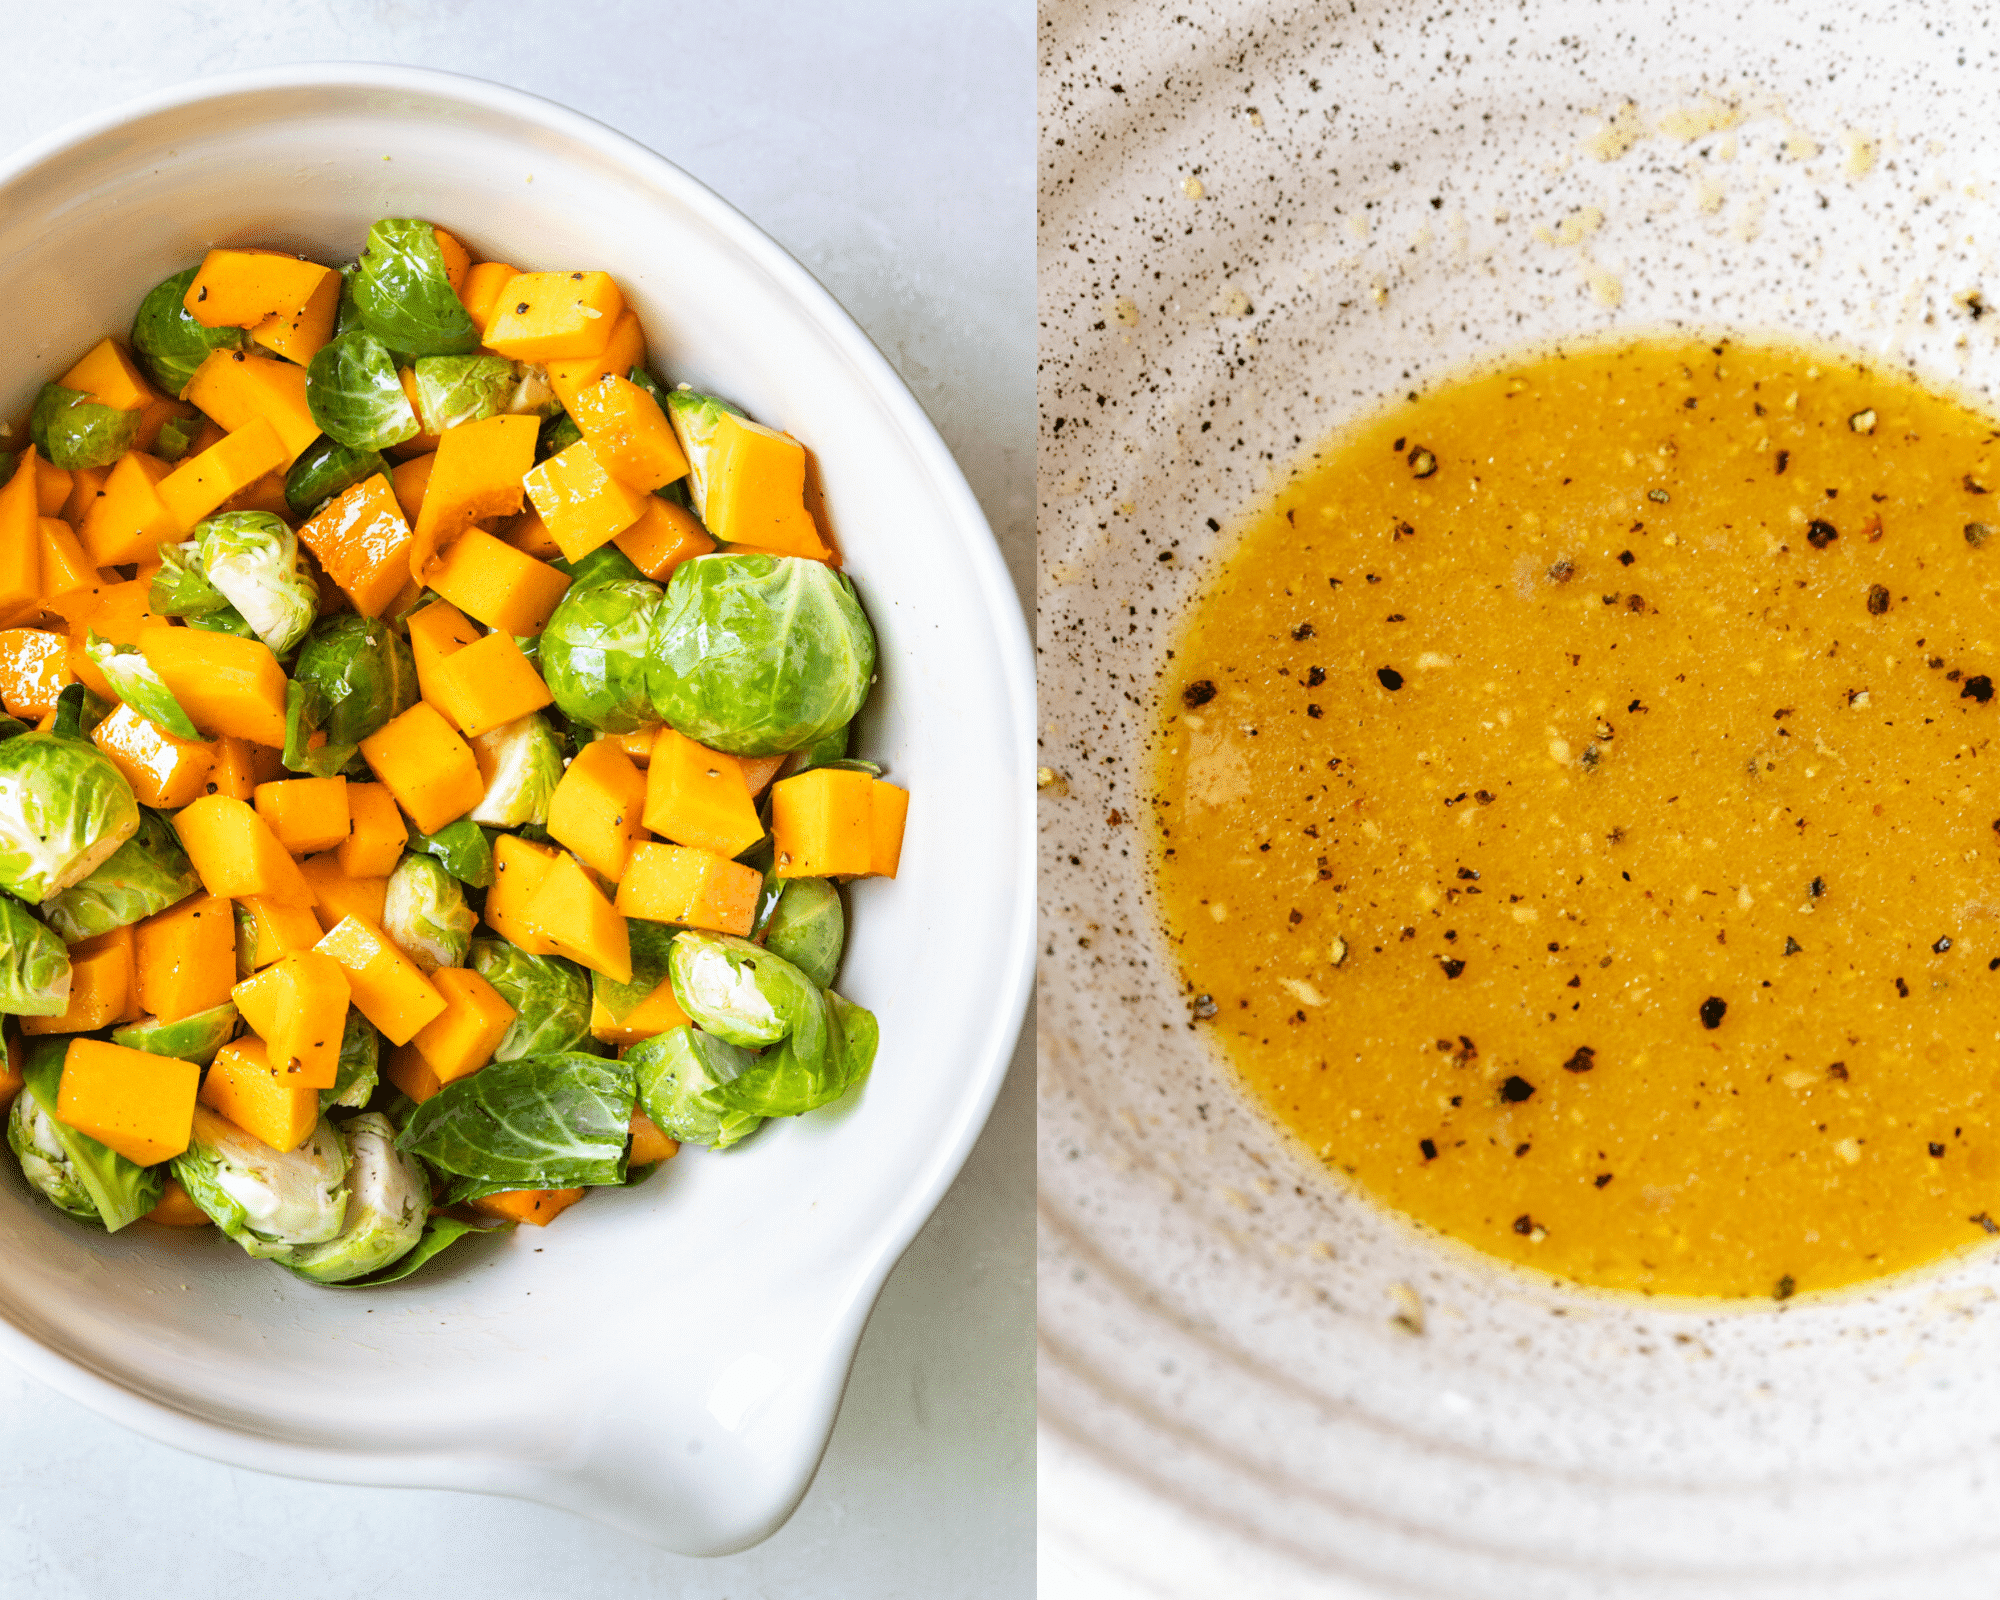 chopped butternut squash and brussels sprouts in a large bowl and a citrus dressing in a white specked bowl